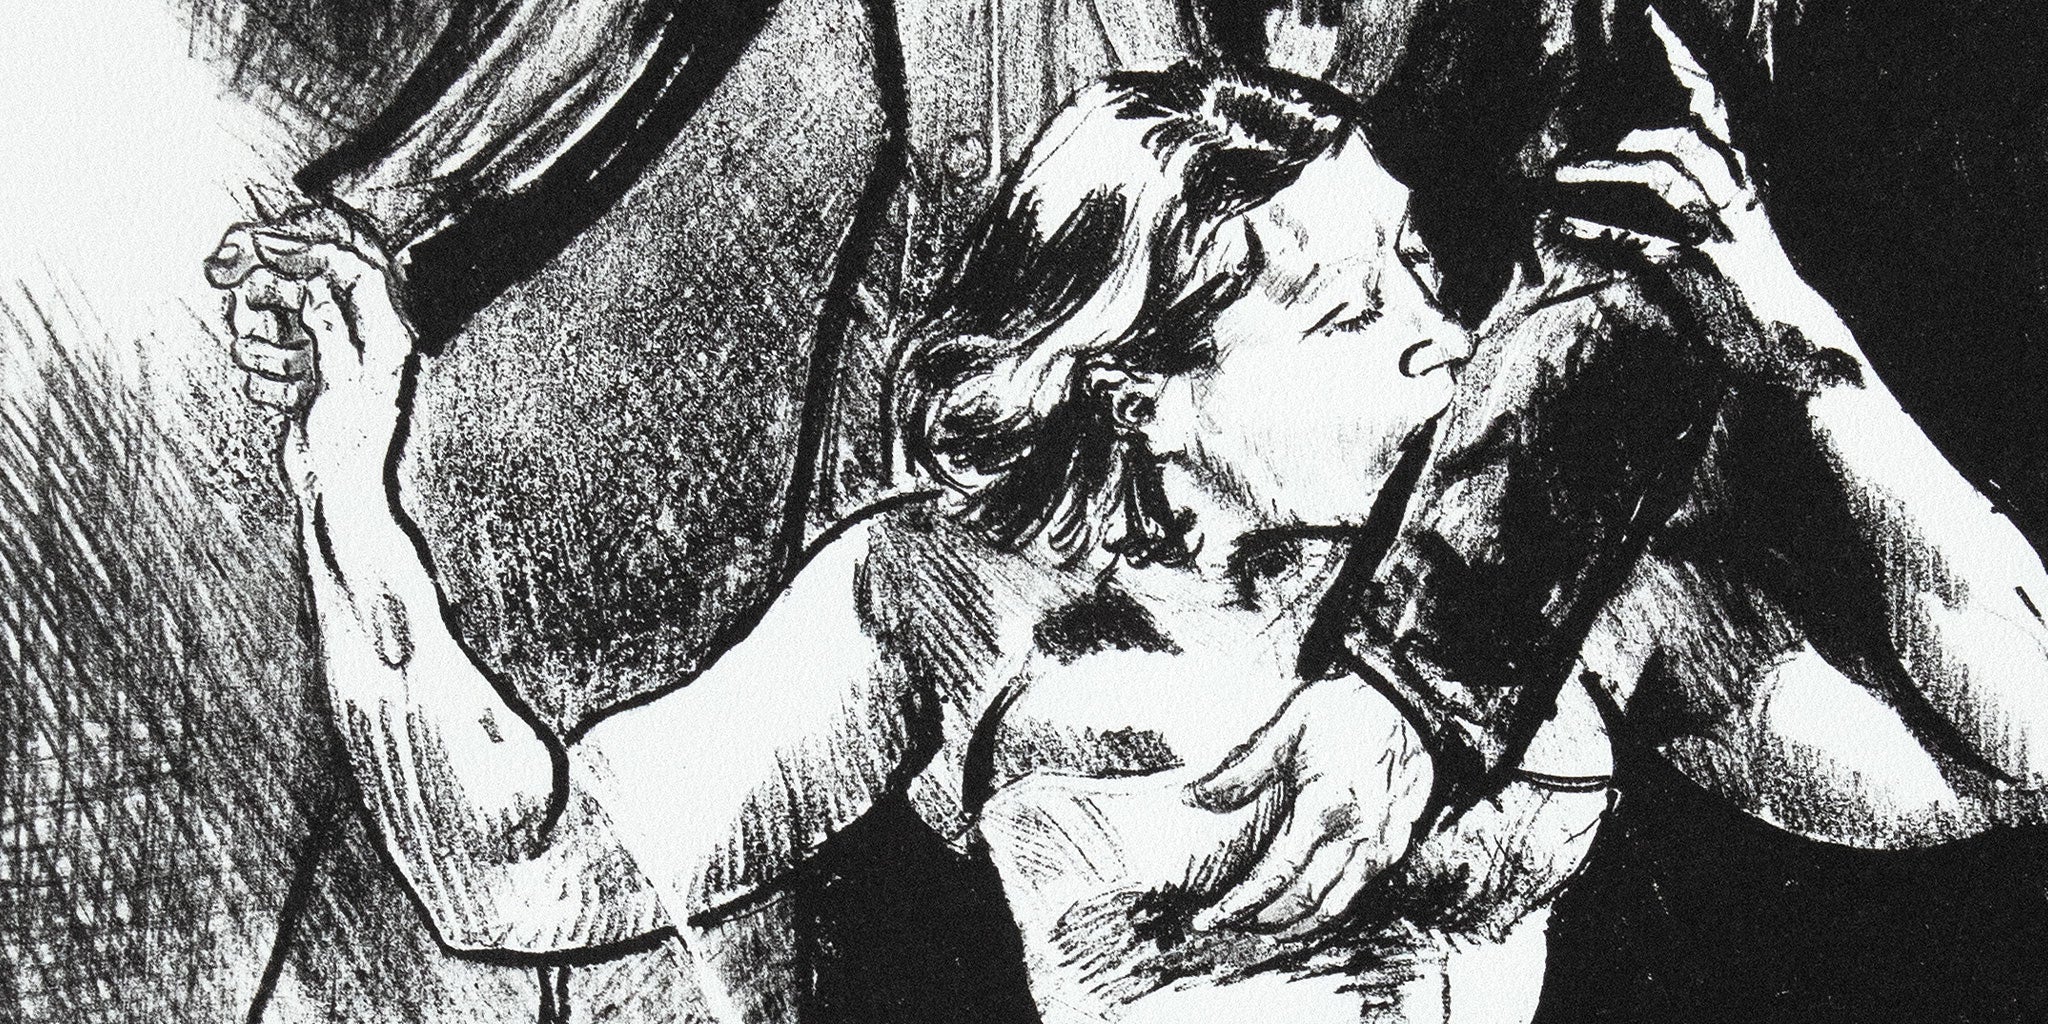 detail from Biting, signed original lithograph by Paula Rego from her Jane Eyre suite, 2001-2002 